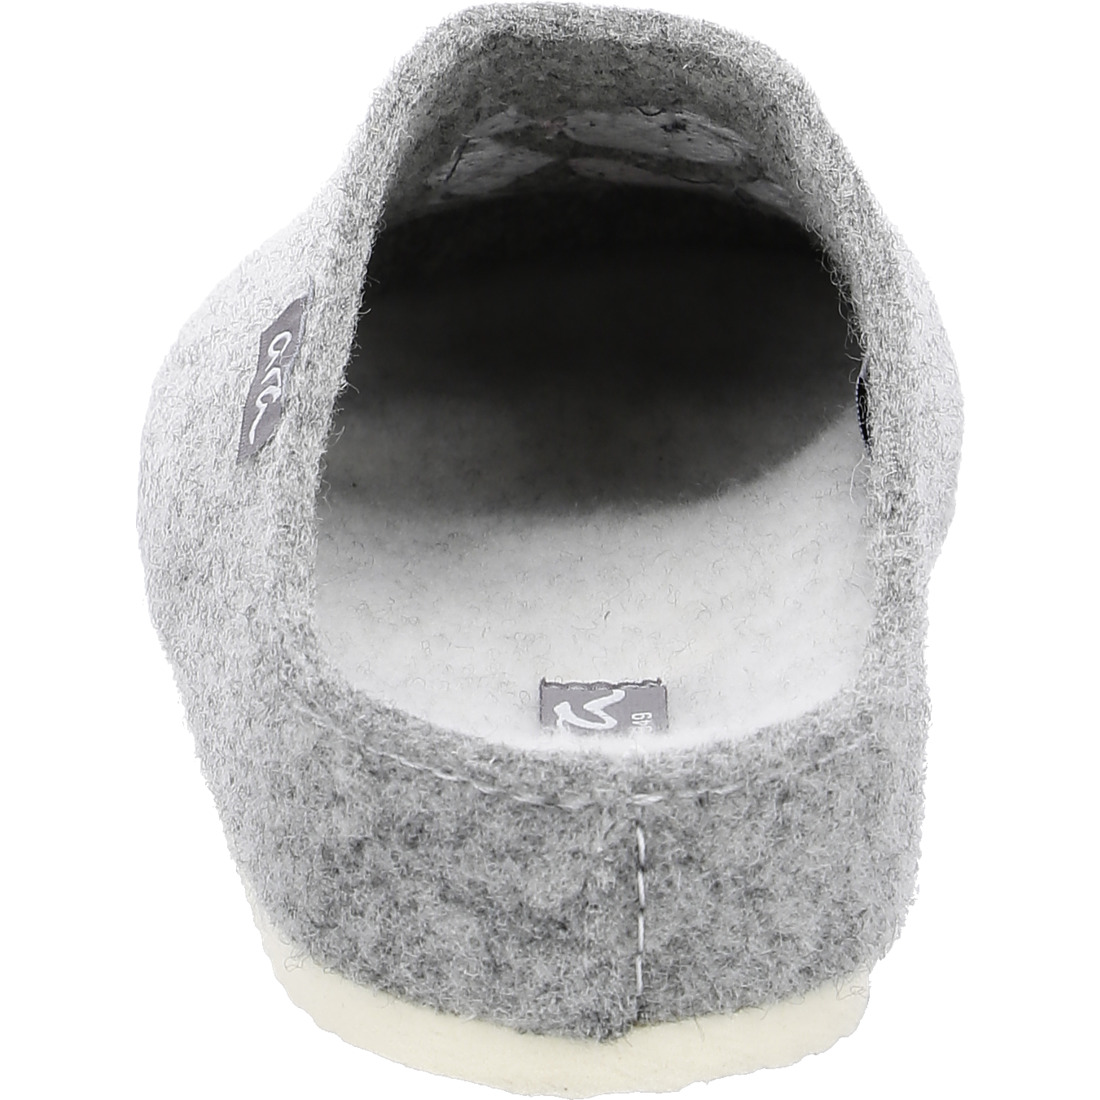 Chaussons*Ara Shoes Chaussons Chaussons Cosy gris